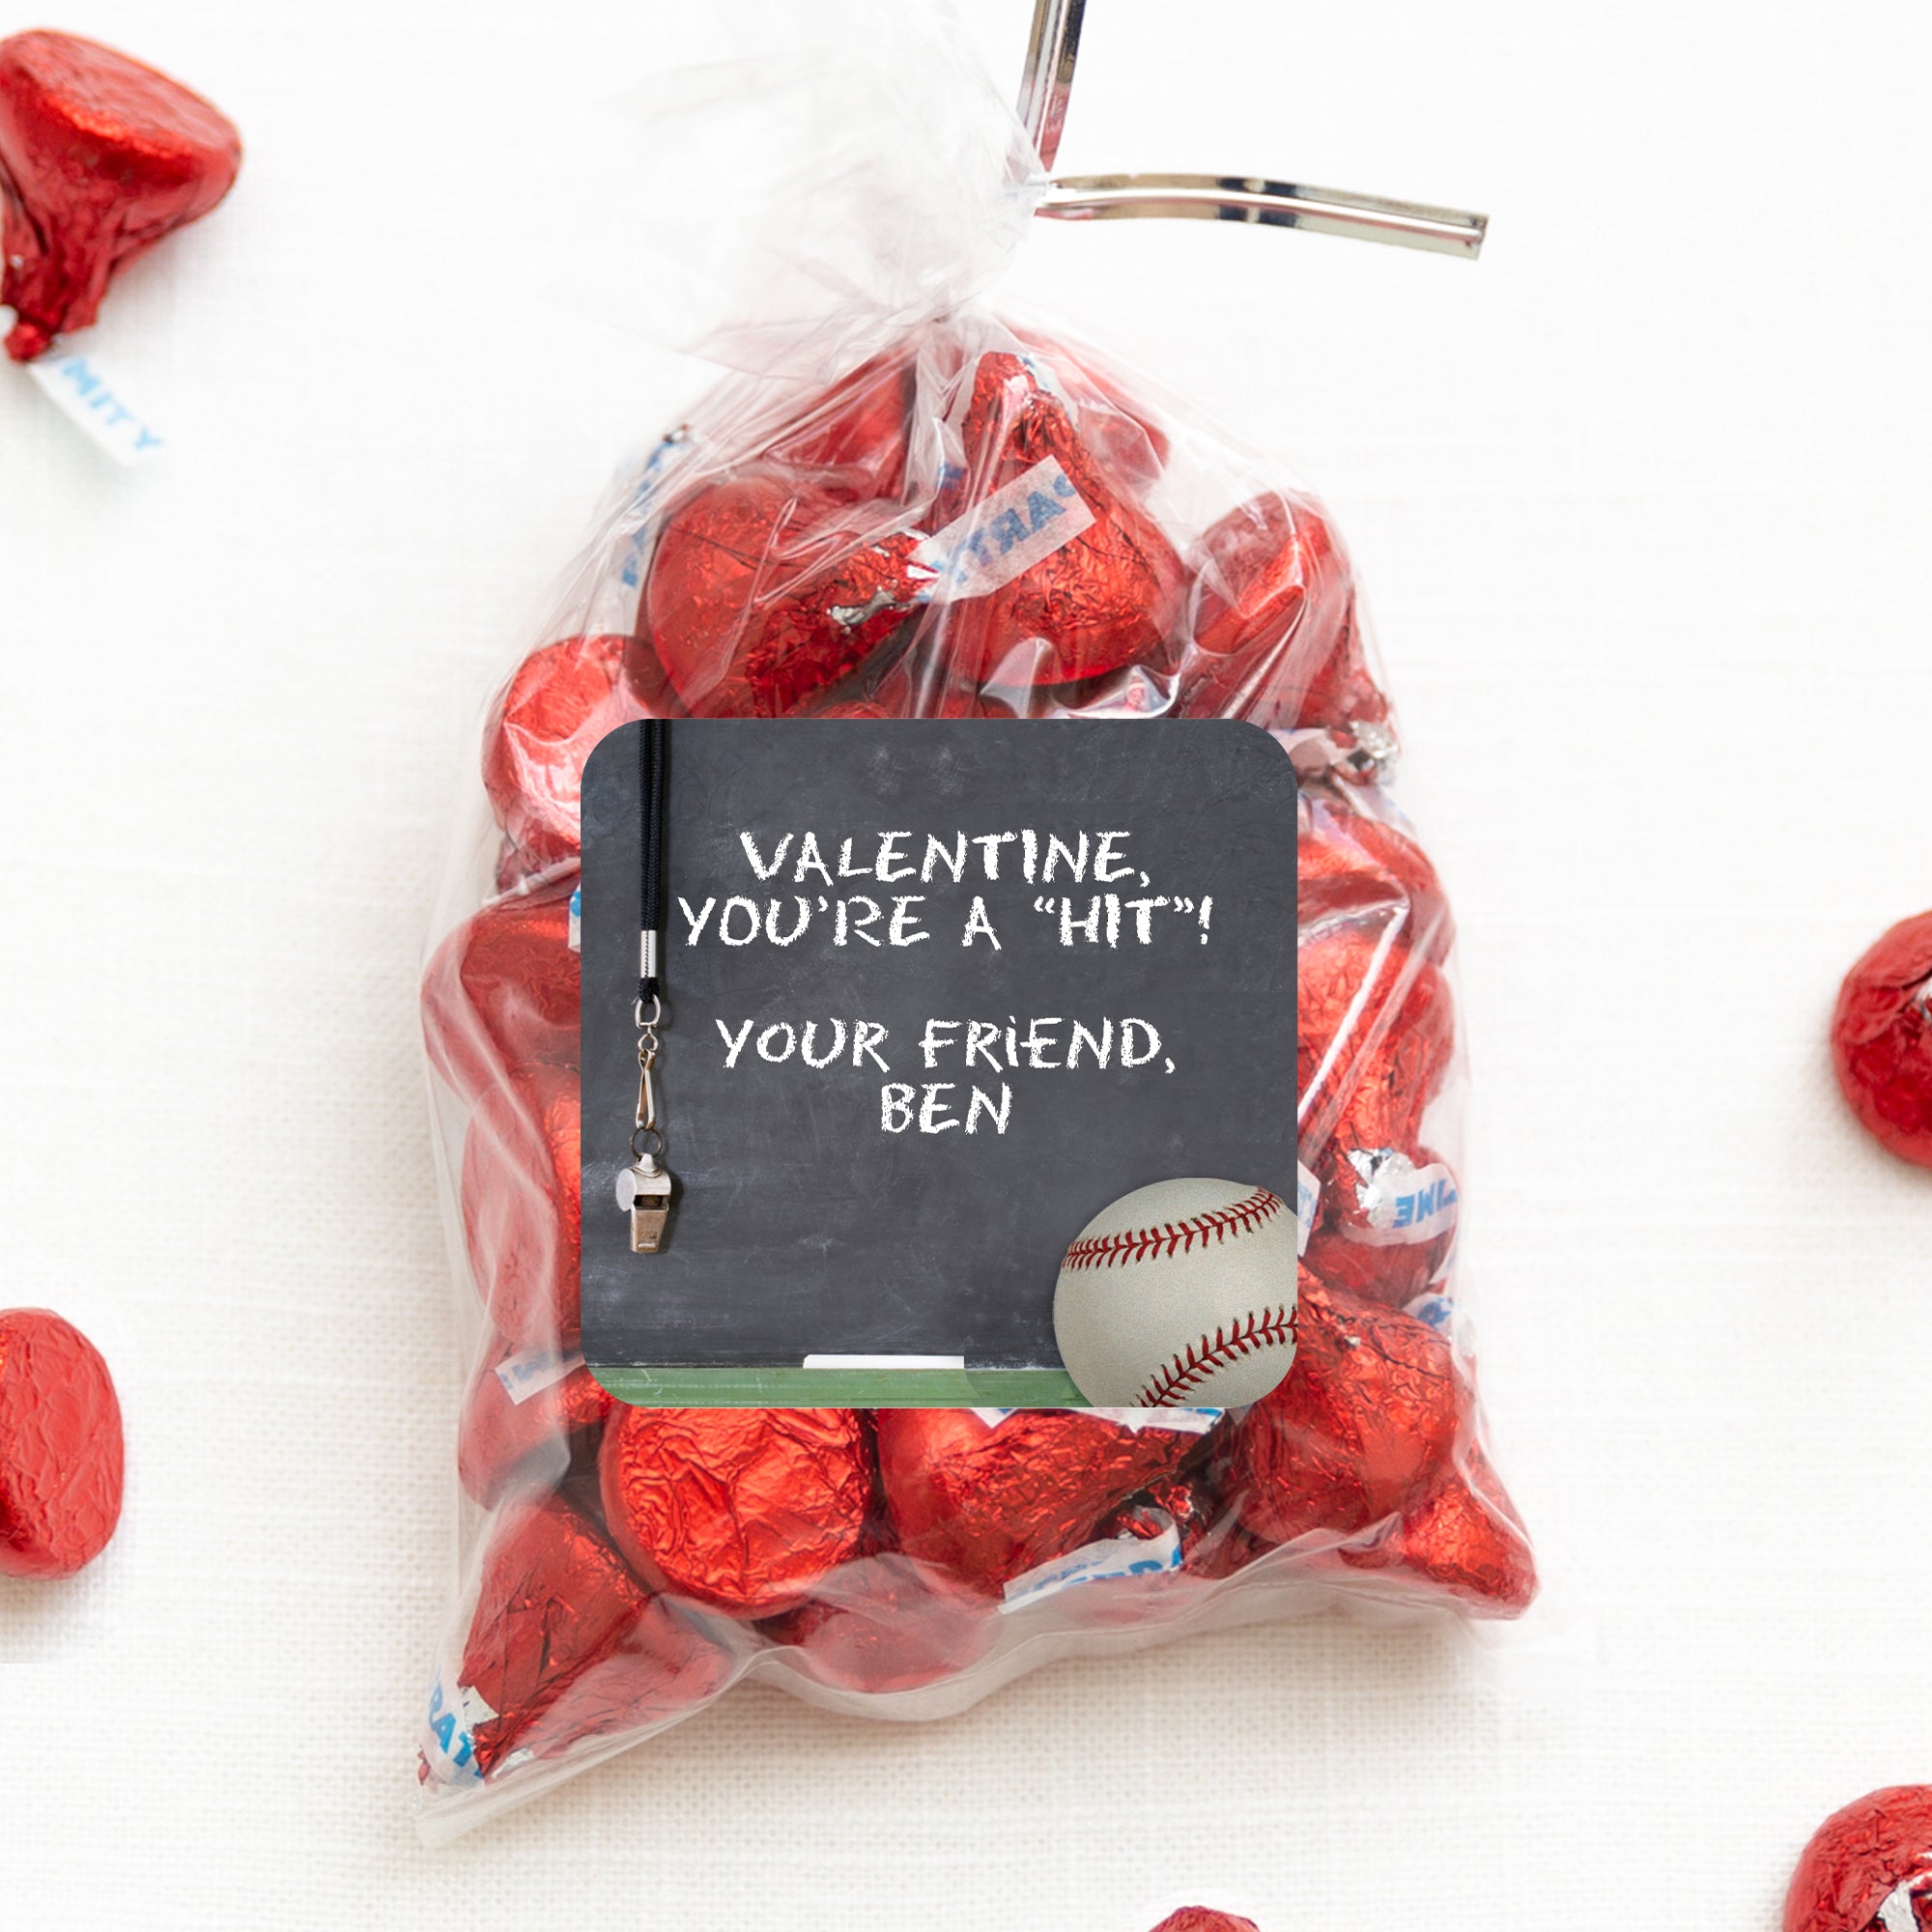 Baseball Chalkboard with whistle Valentine Sticker | 2.5" Square sticker for treat bags | Classroom Stickers | Valentine's Day stickersPipsy.com